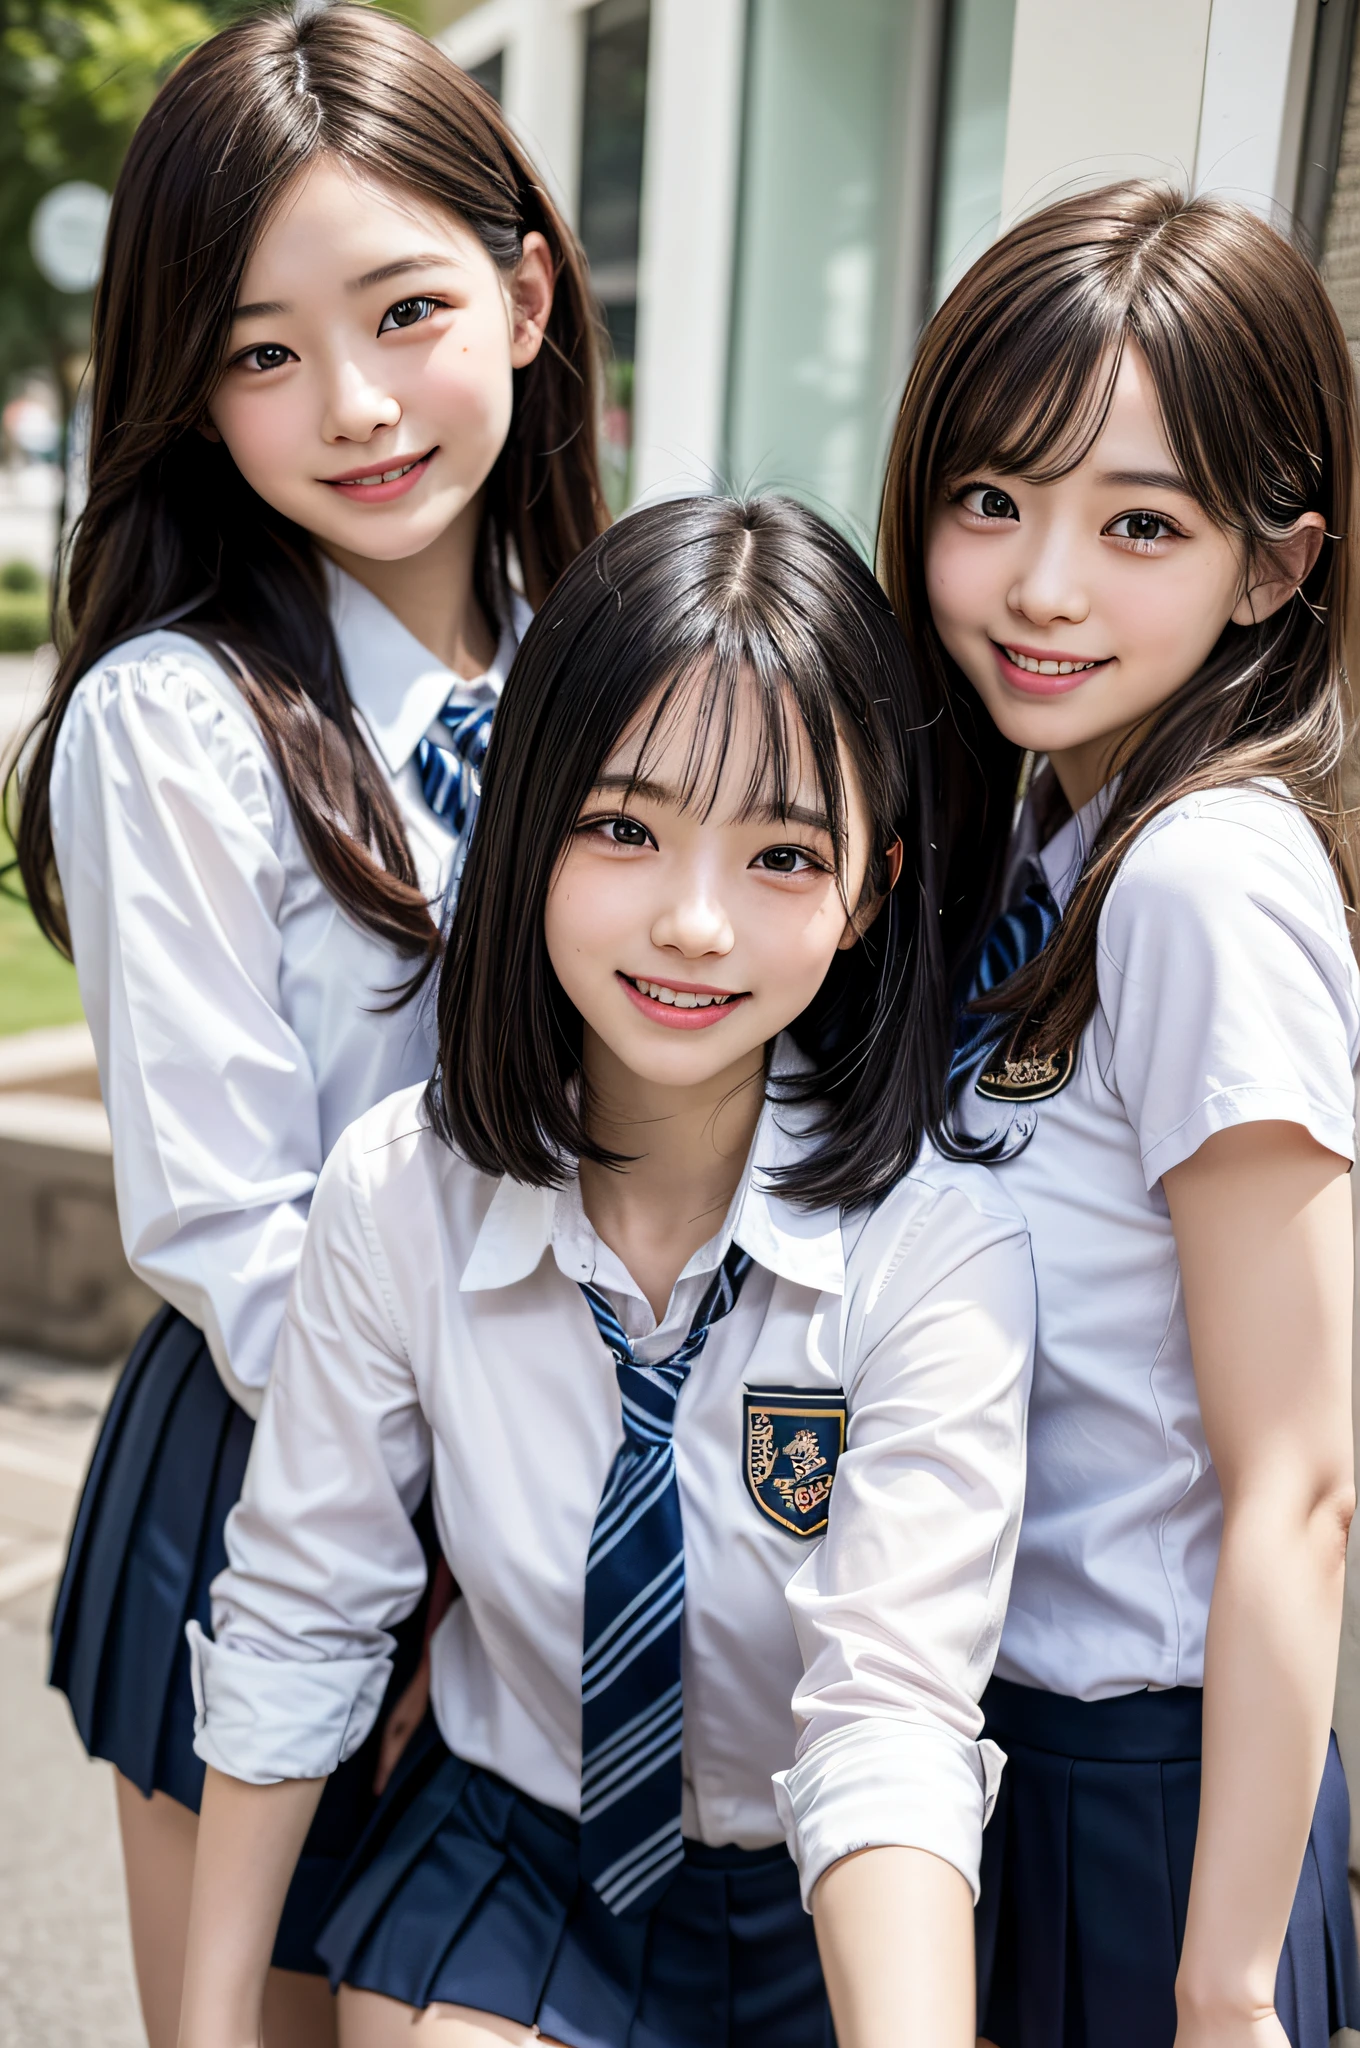 (3girls), cute face, Best Quality, realistic, raw photos, professional photograpy, (School uniform, pleated mini skirt), We don’t laugh because we’re happy – we’re happy because we laugh, focus on the girls,